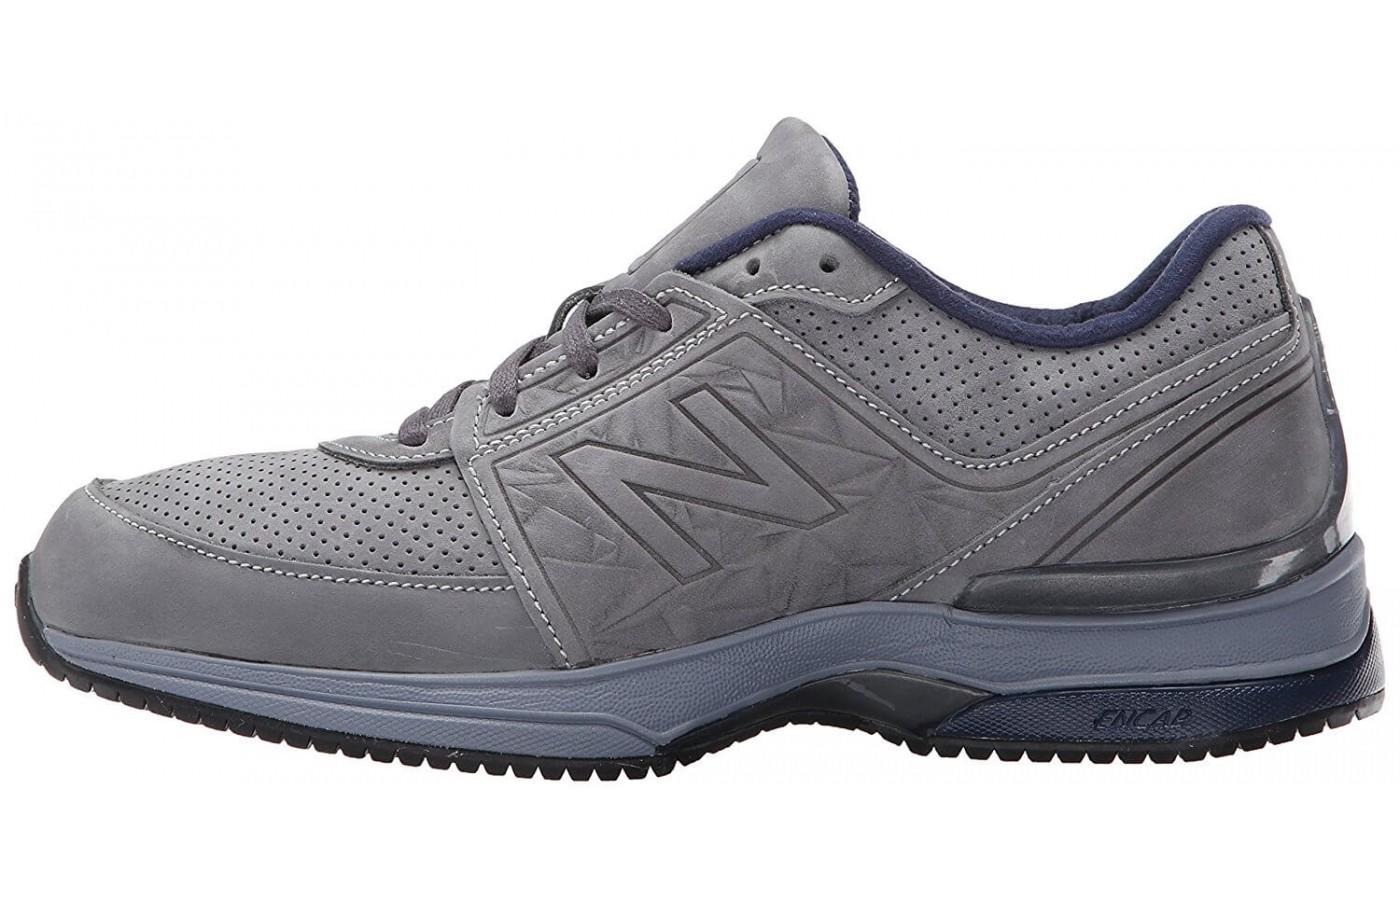 Sideview of the New Balance 2040 v3